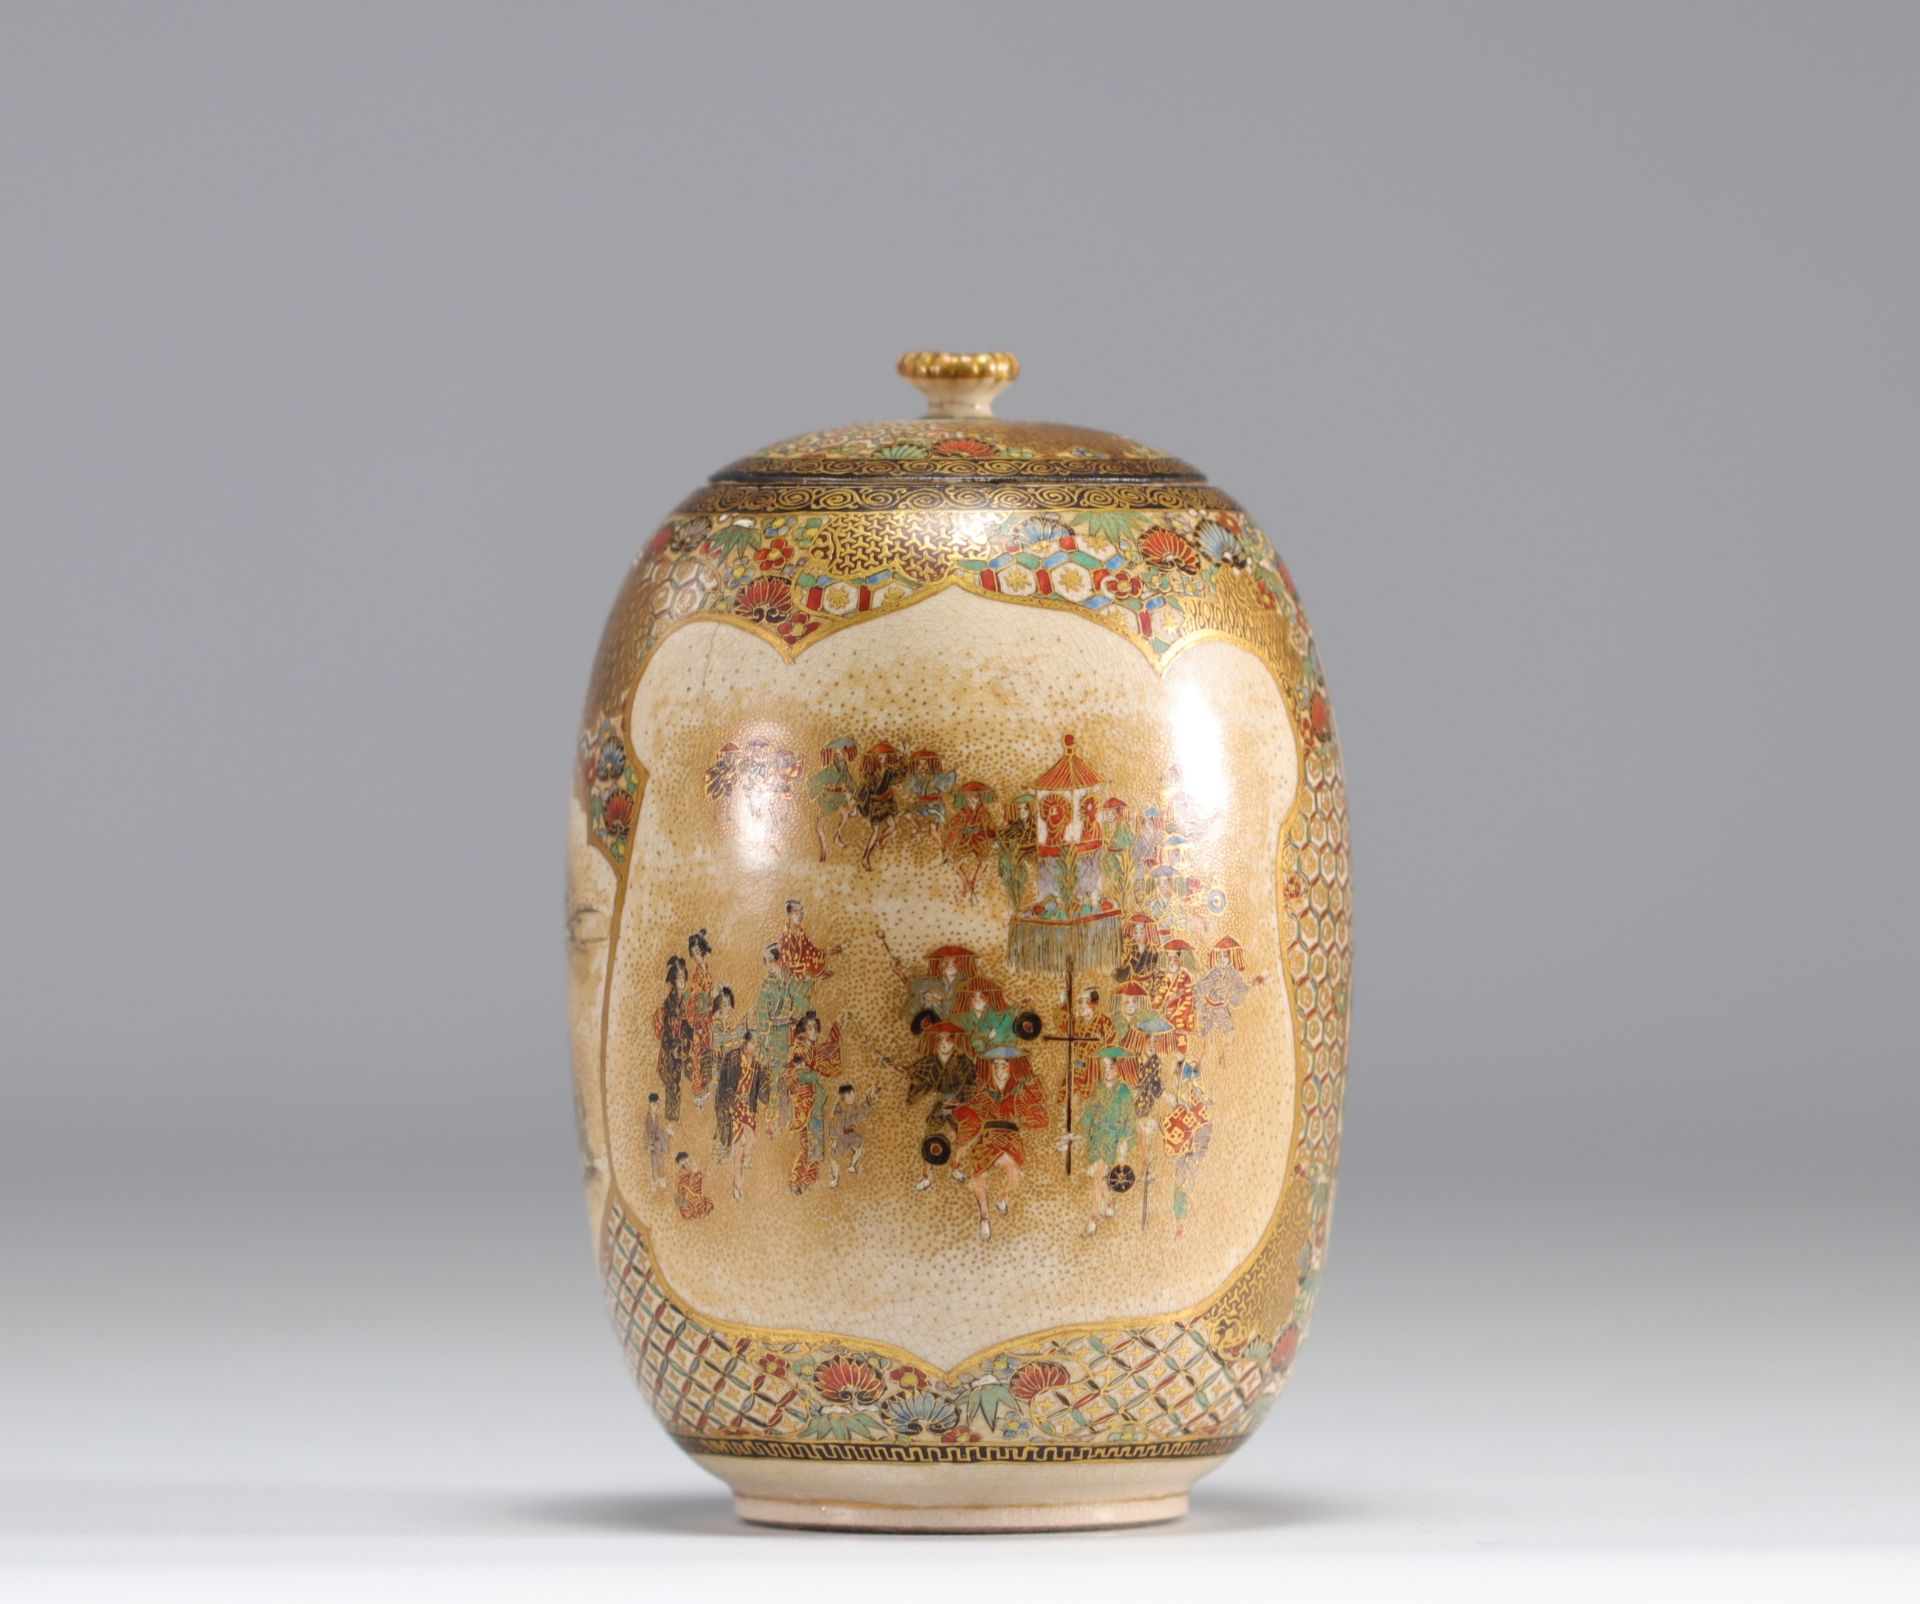 A beautiful enamel-decorated Satsuma covered vase with figures and flowers, circa late 19th century